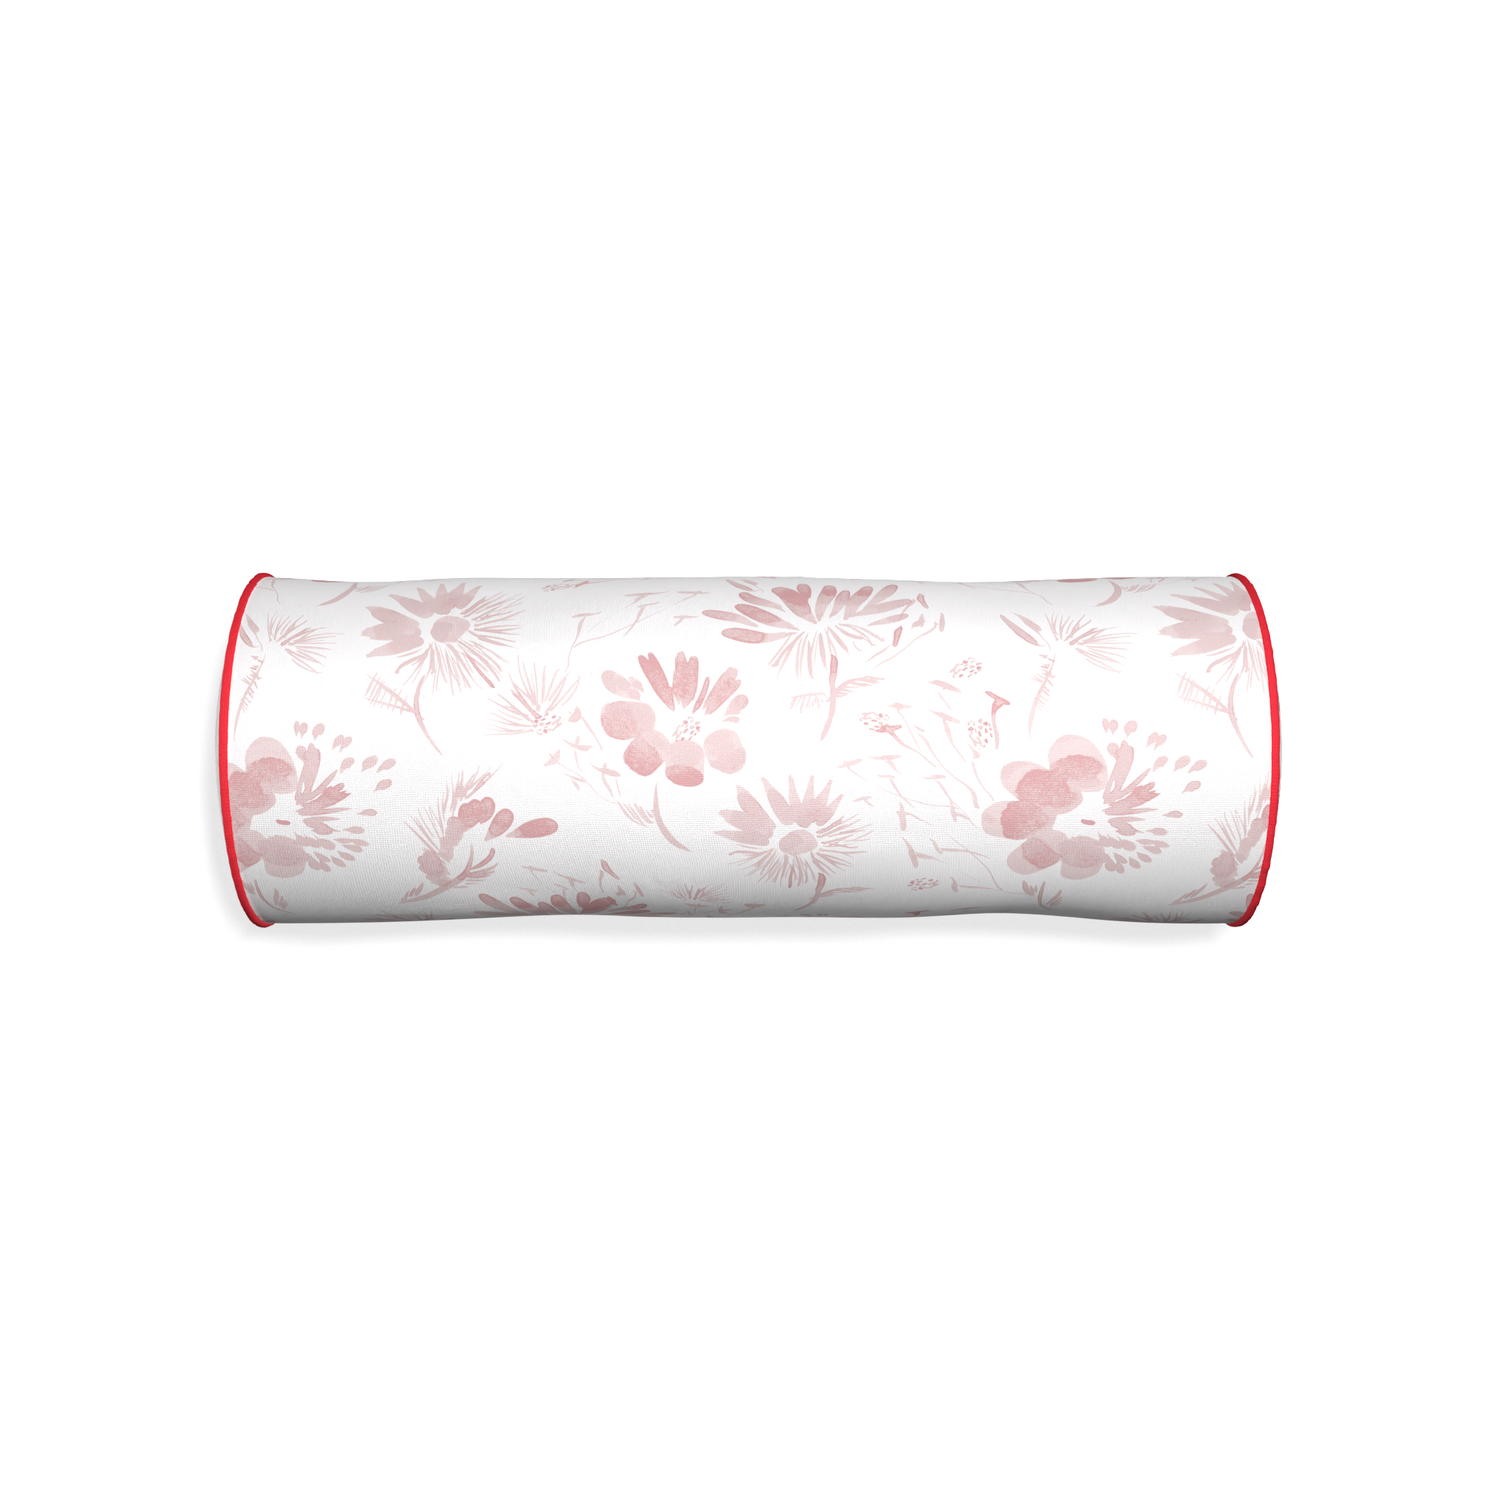 Bolster blake custom pink floralpillow with cherry piping on white background